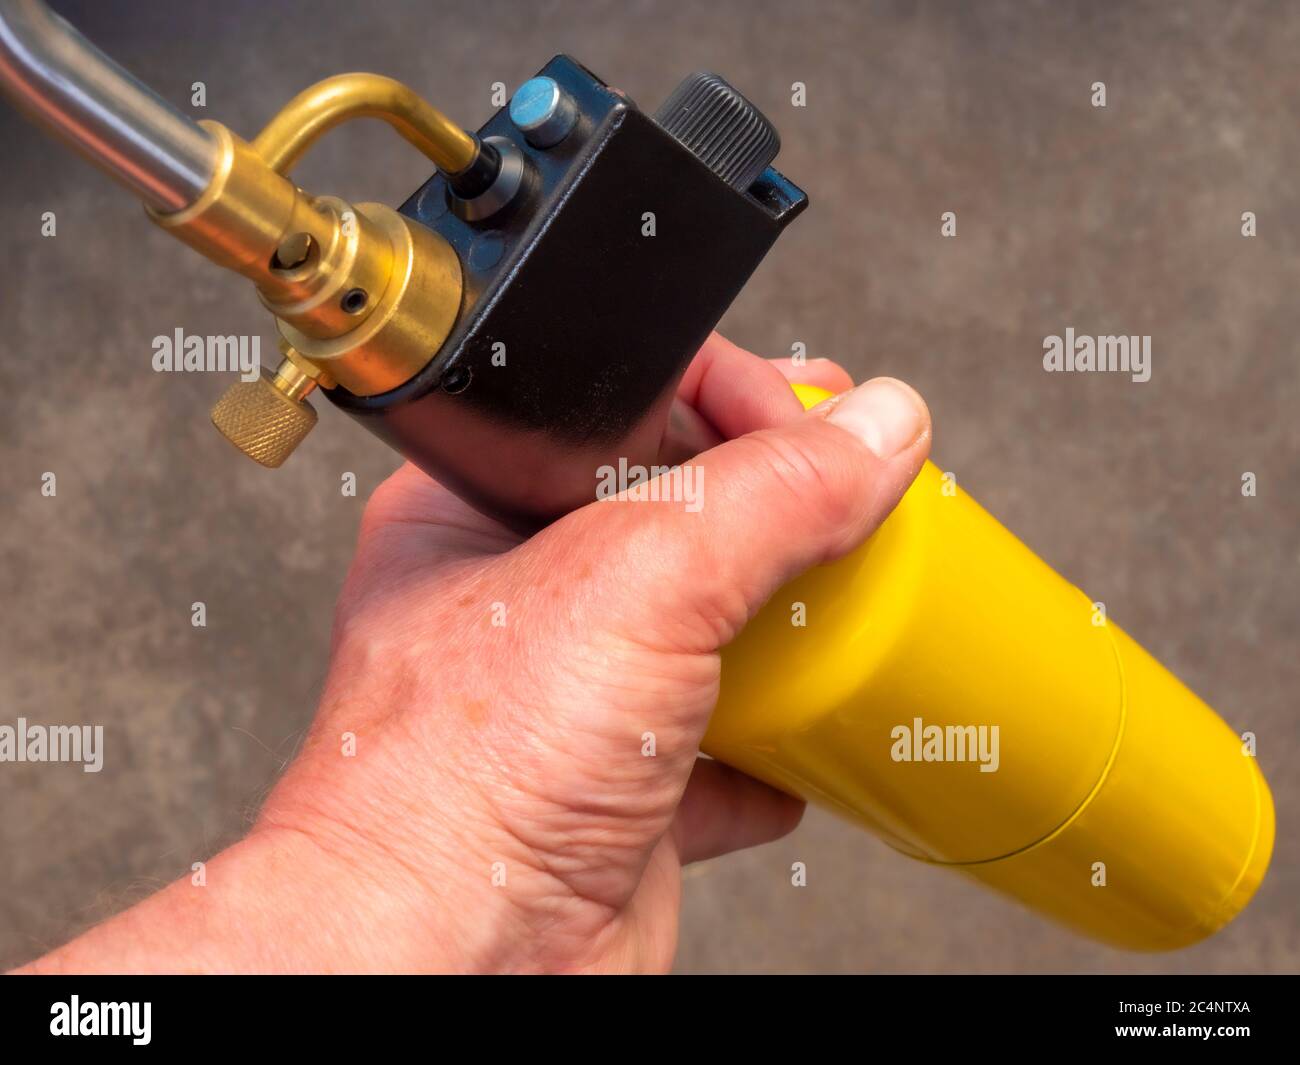 Closeup POV shot of a man’s hand holding a traditional blowtorch / blow torch, with a bright yellow gas cylinder / canister. Stock Photo